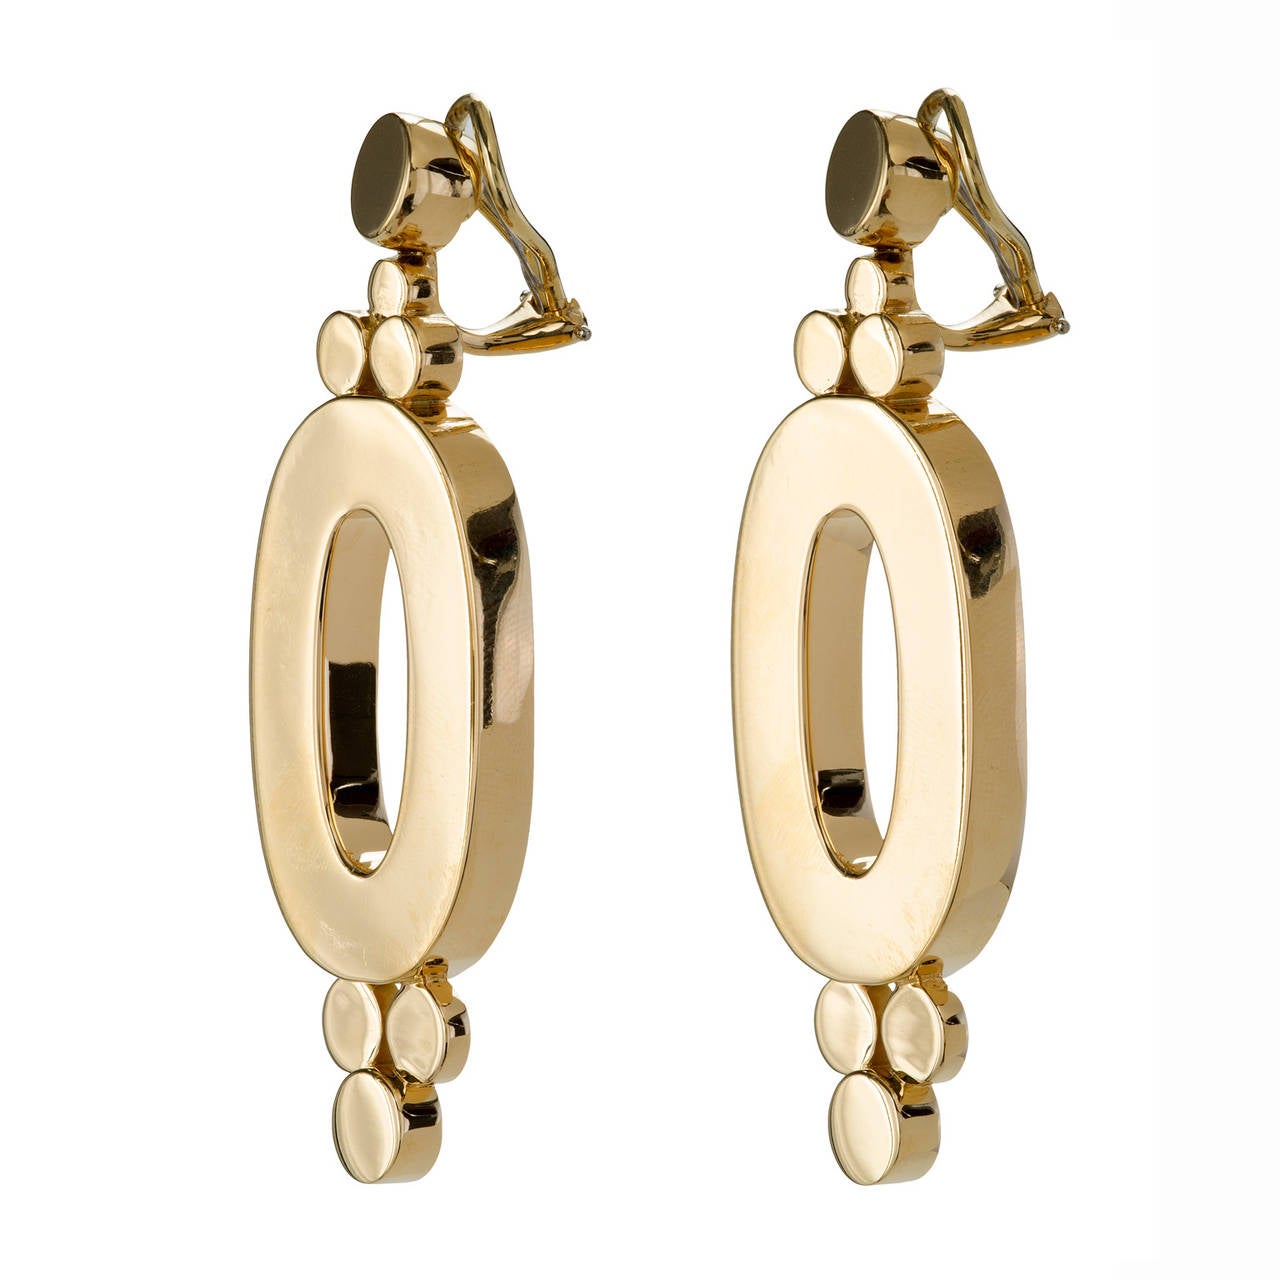 These 18k oval earrings are large but delicate. The design is of varying circles, articulated at different heights. The effect is shimmery and casual. Despite an old world Victorian undertone the design of these earrings is influenced by the grand